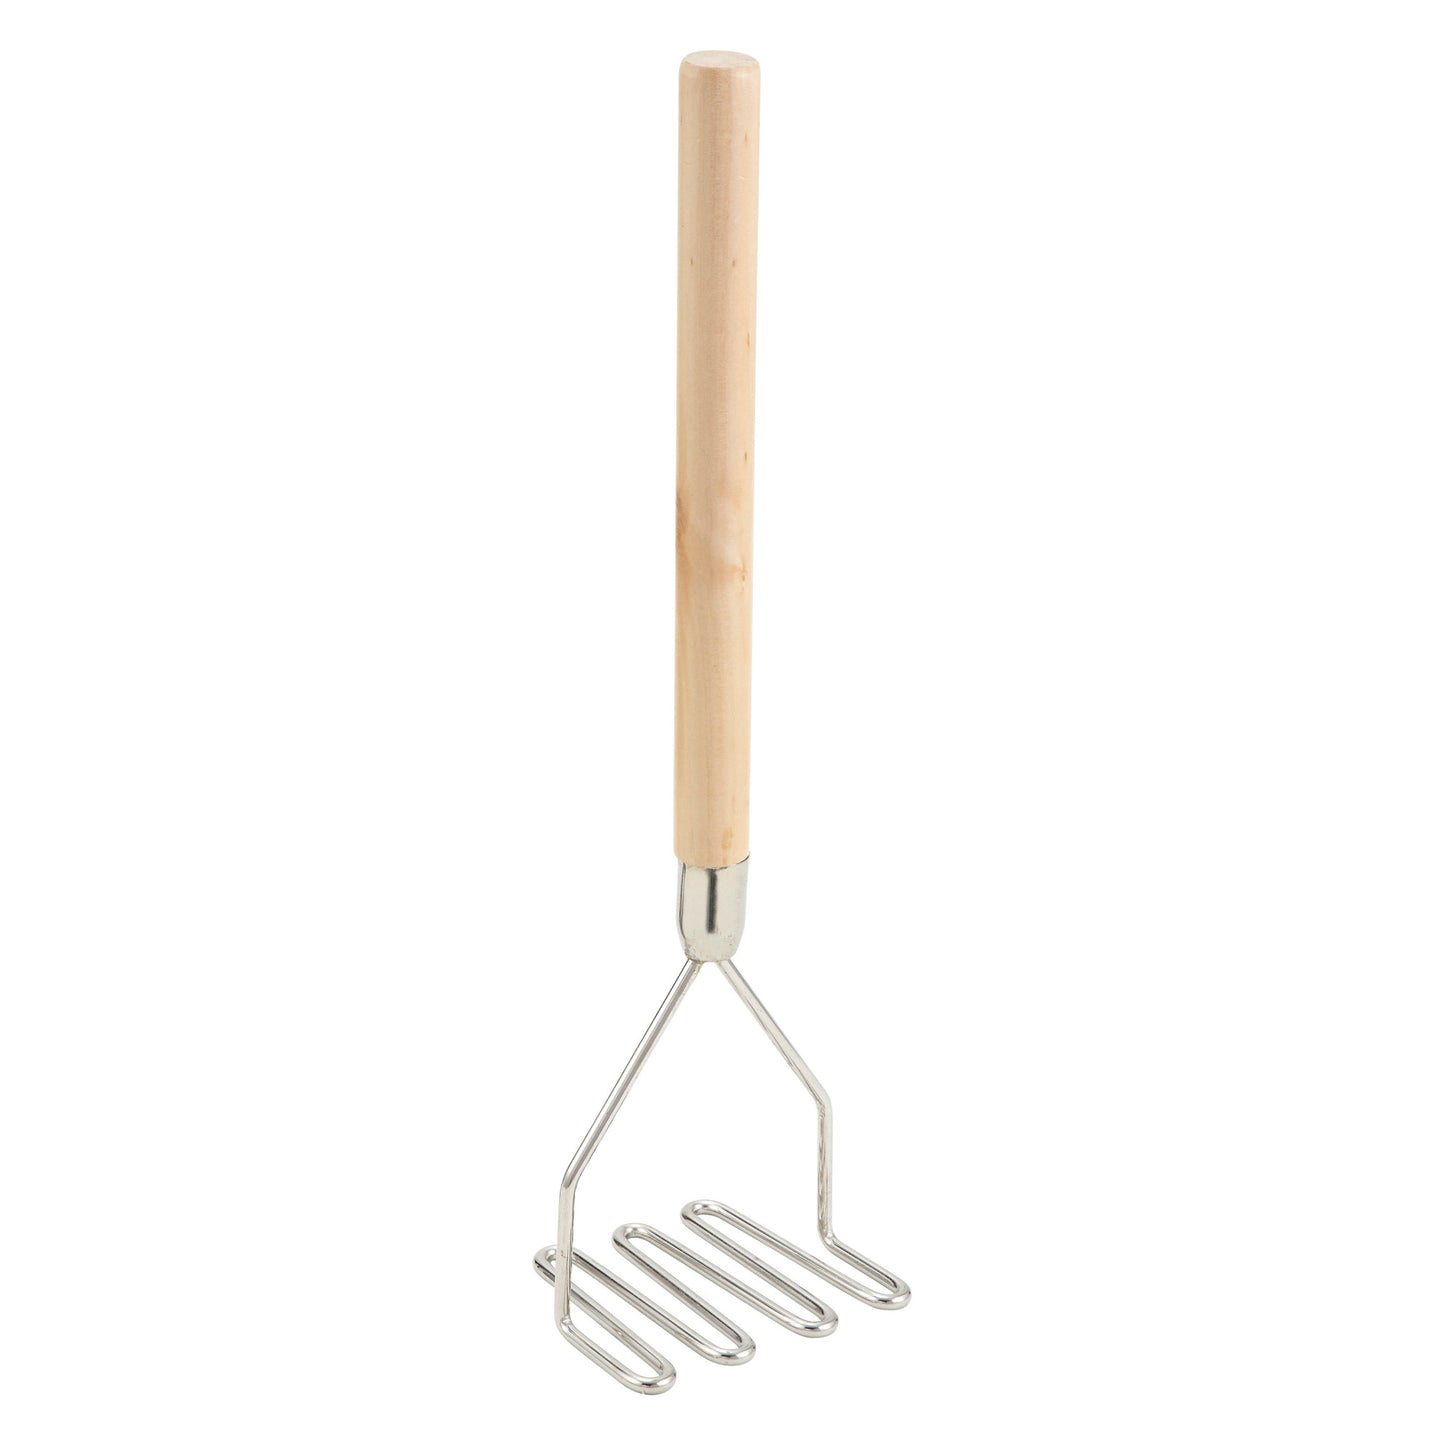 PTM-18S - Potato Masher with Wooden Handle - 4-1/2"